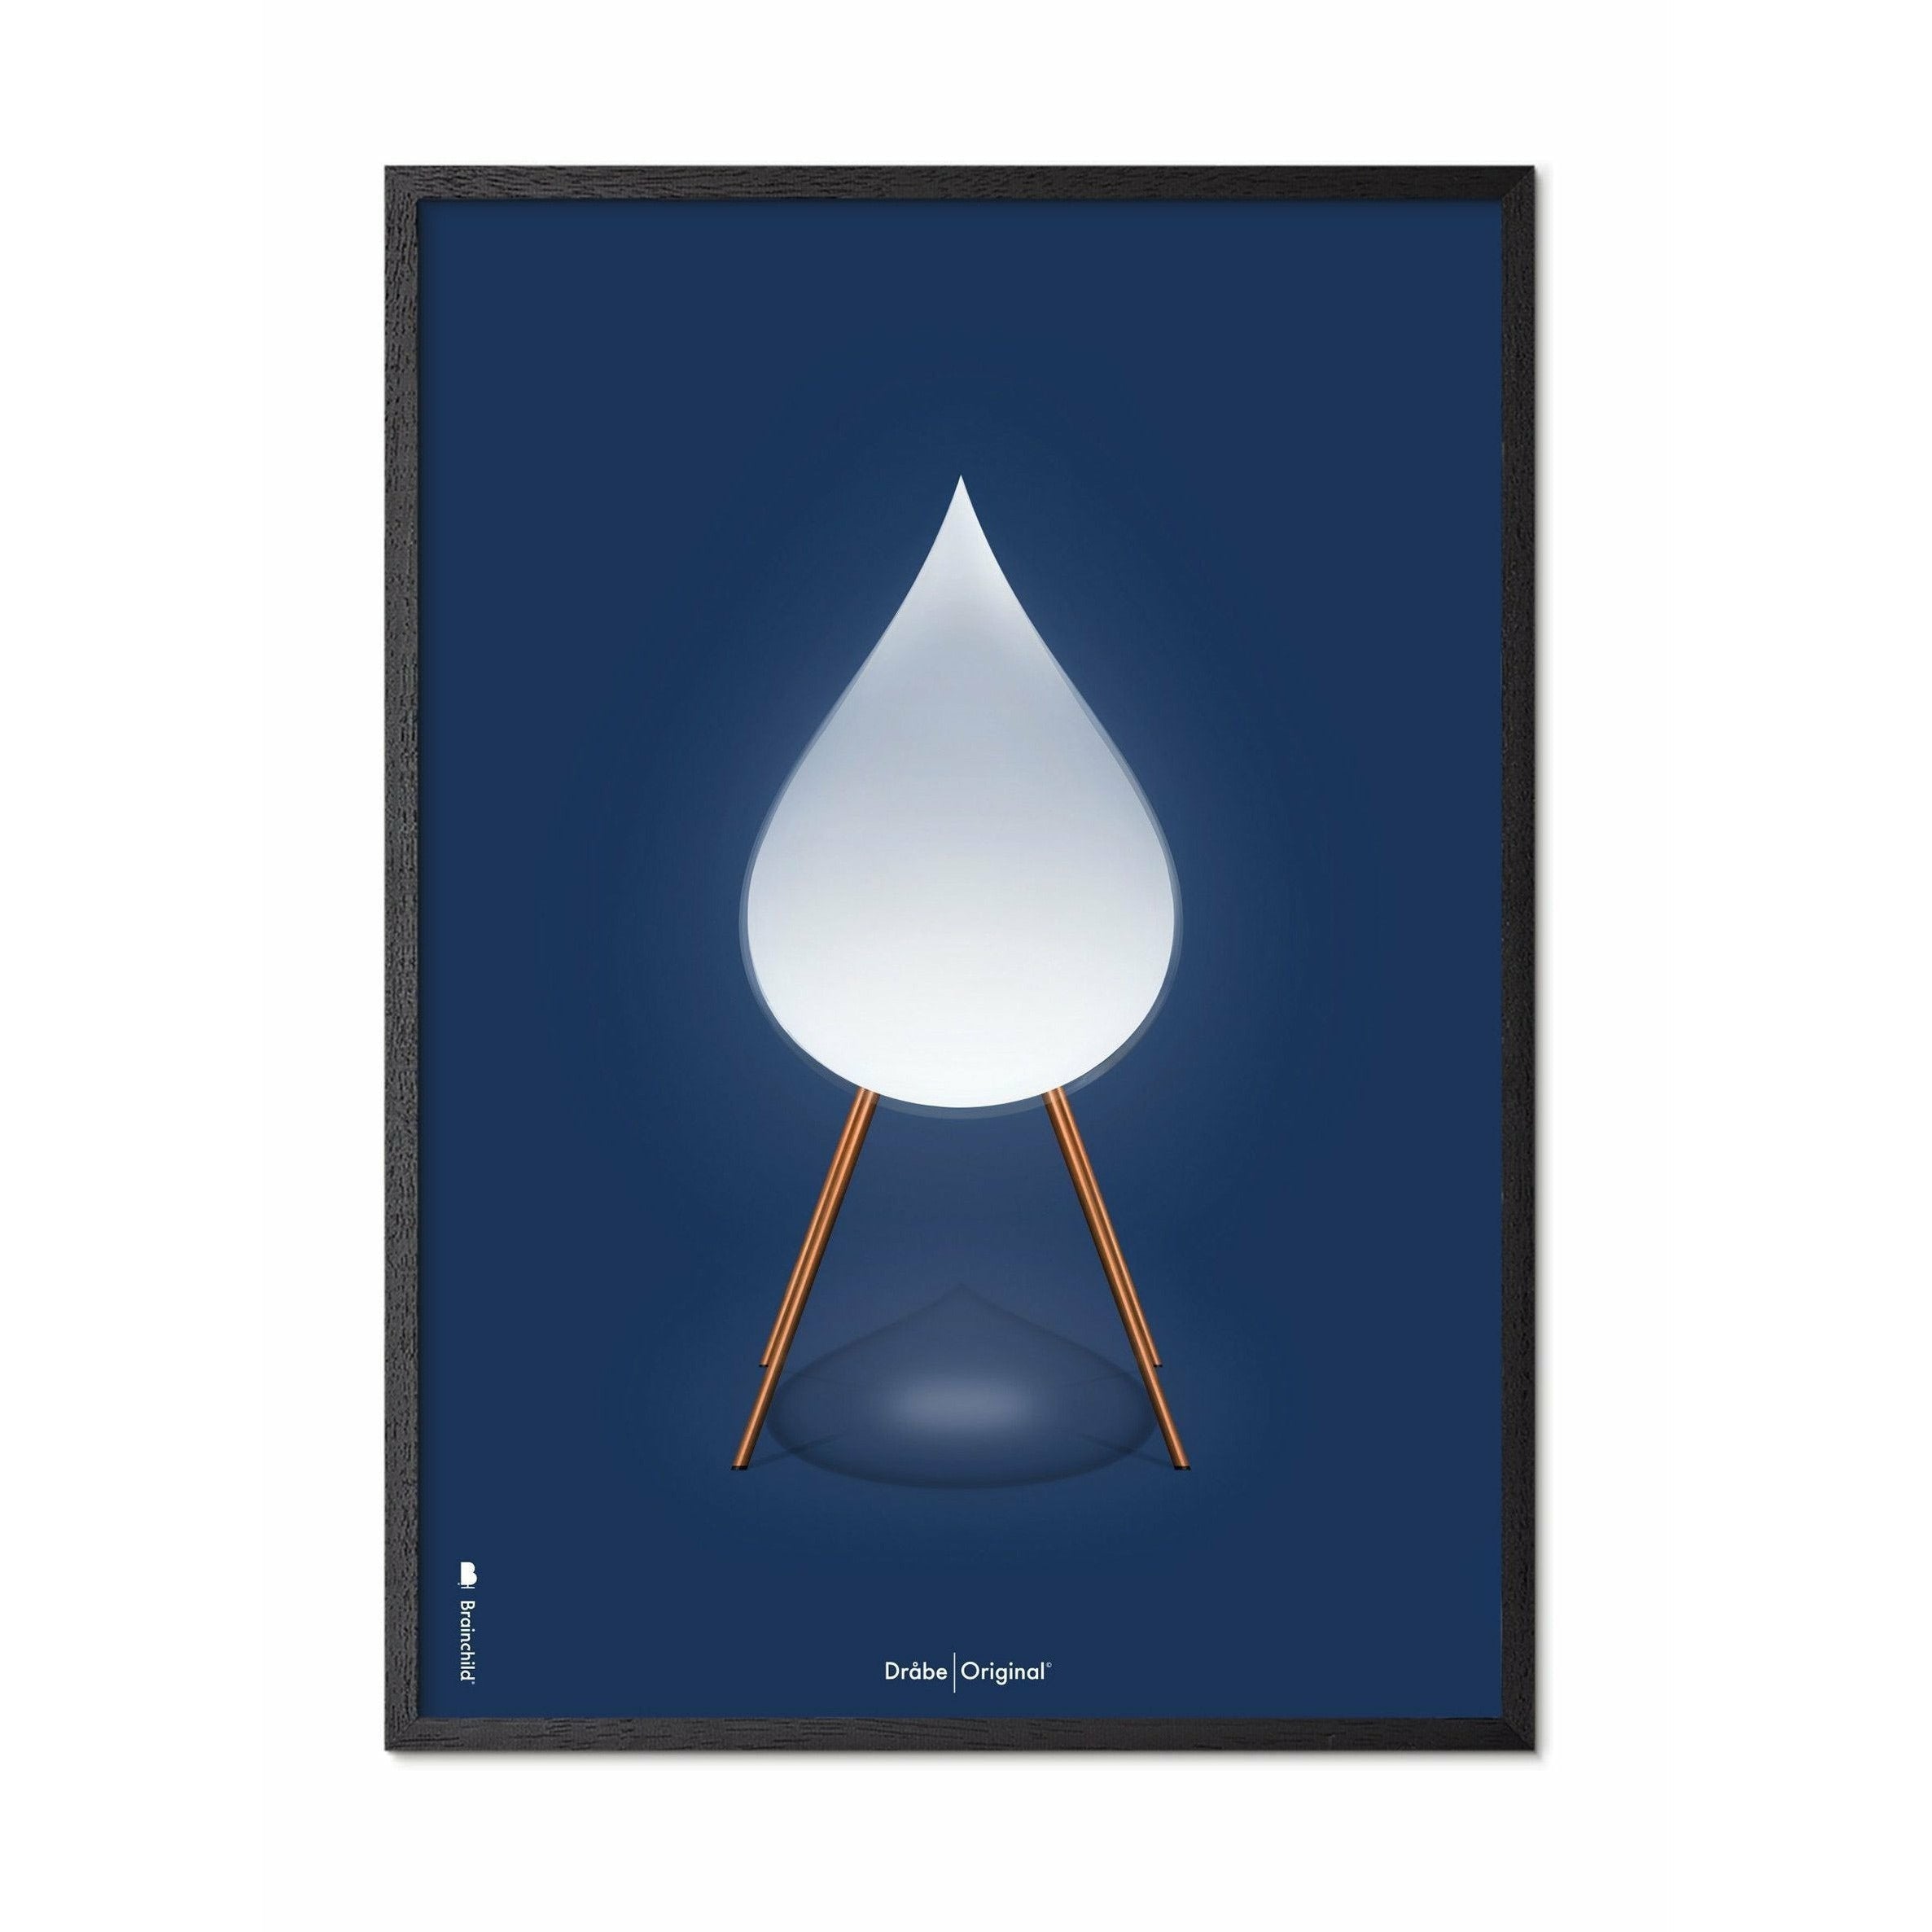 Brainchild Drops Classic Poster, Frame In Black Lacquered Wood 30x40 Cm, Dark Blue Background